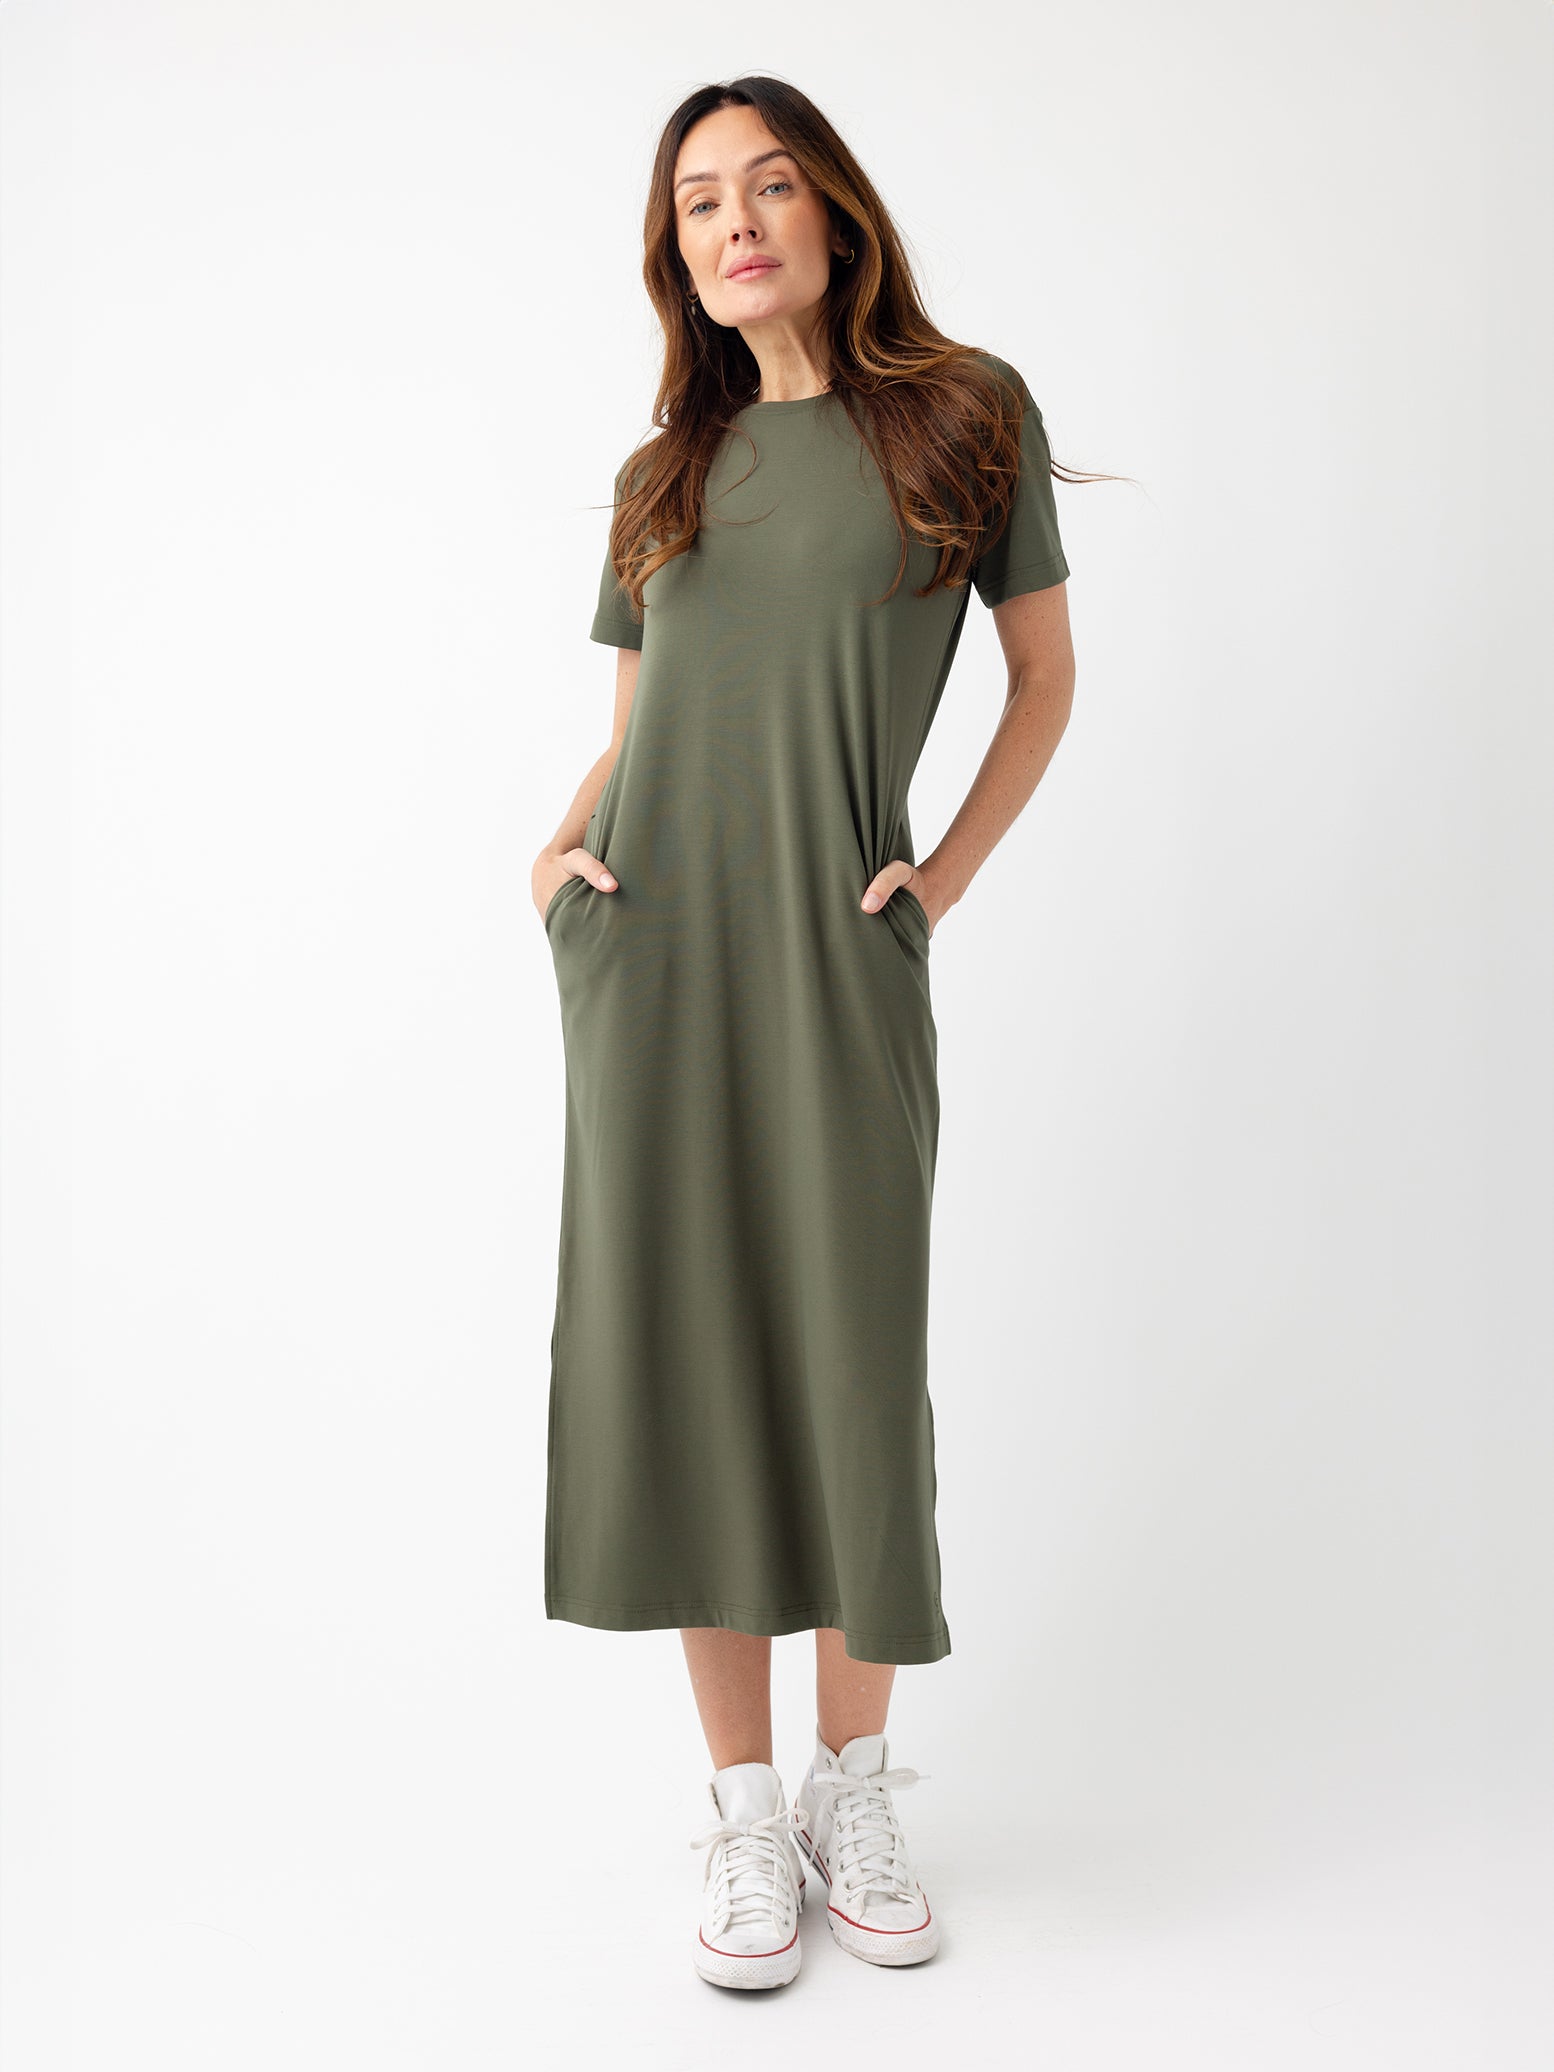 Woman in olive midi dress with white background 